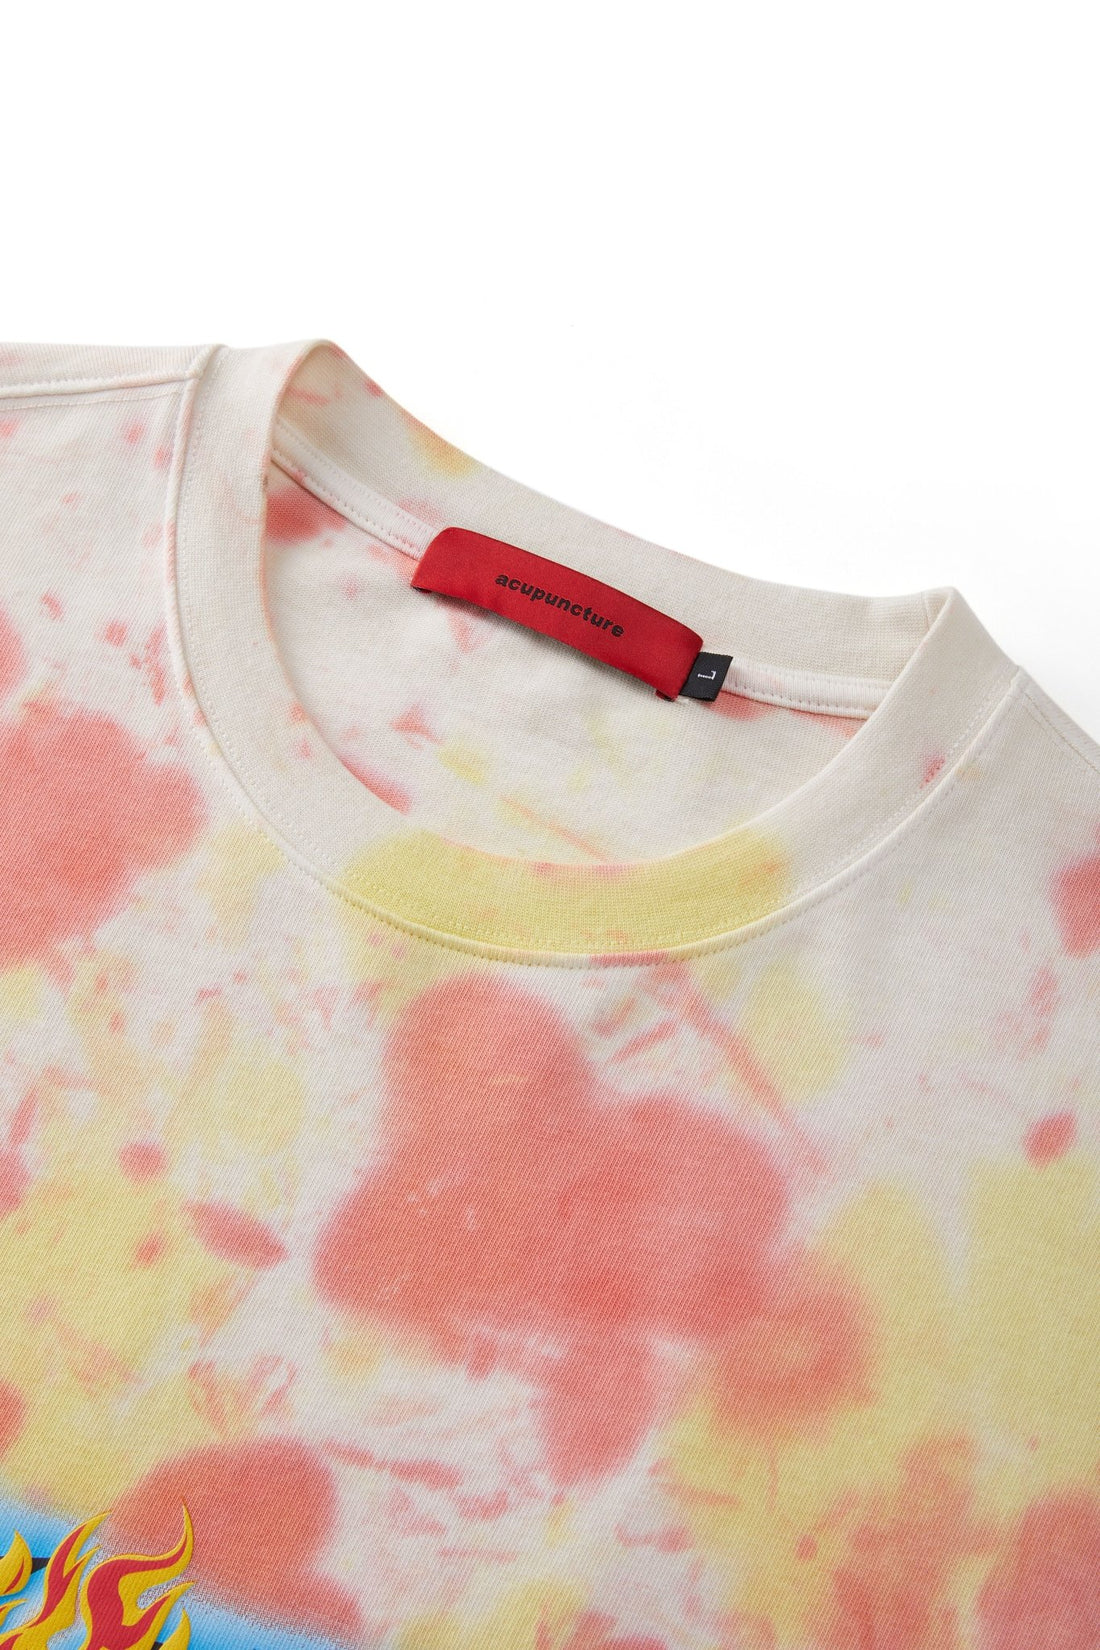 BURNING T-SHIRT PINK Acupuncture